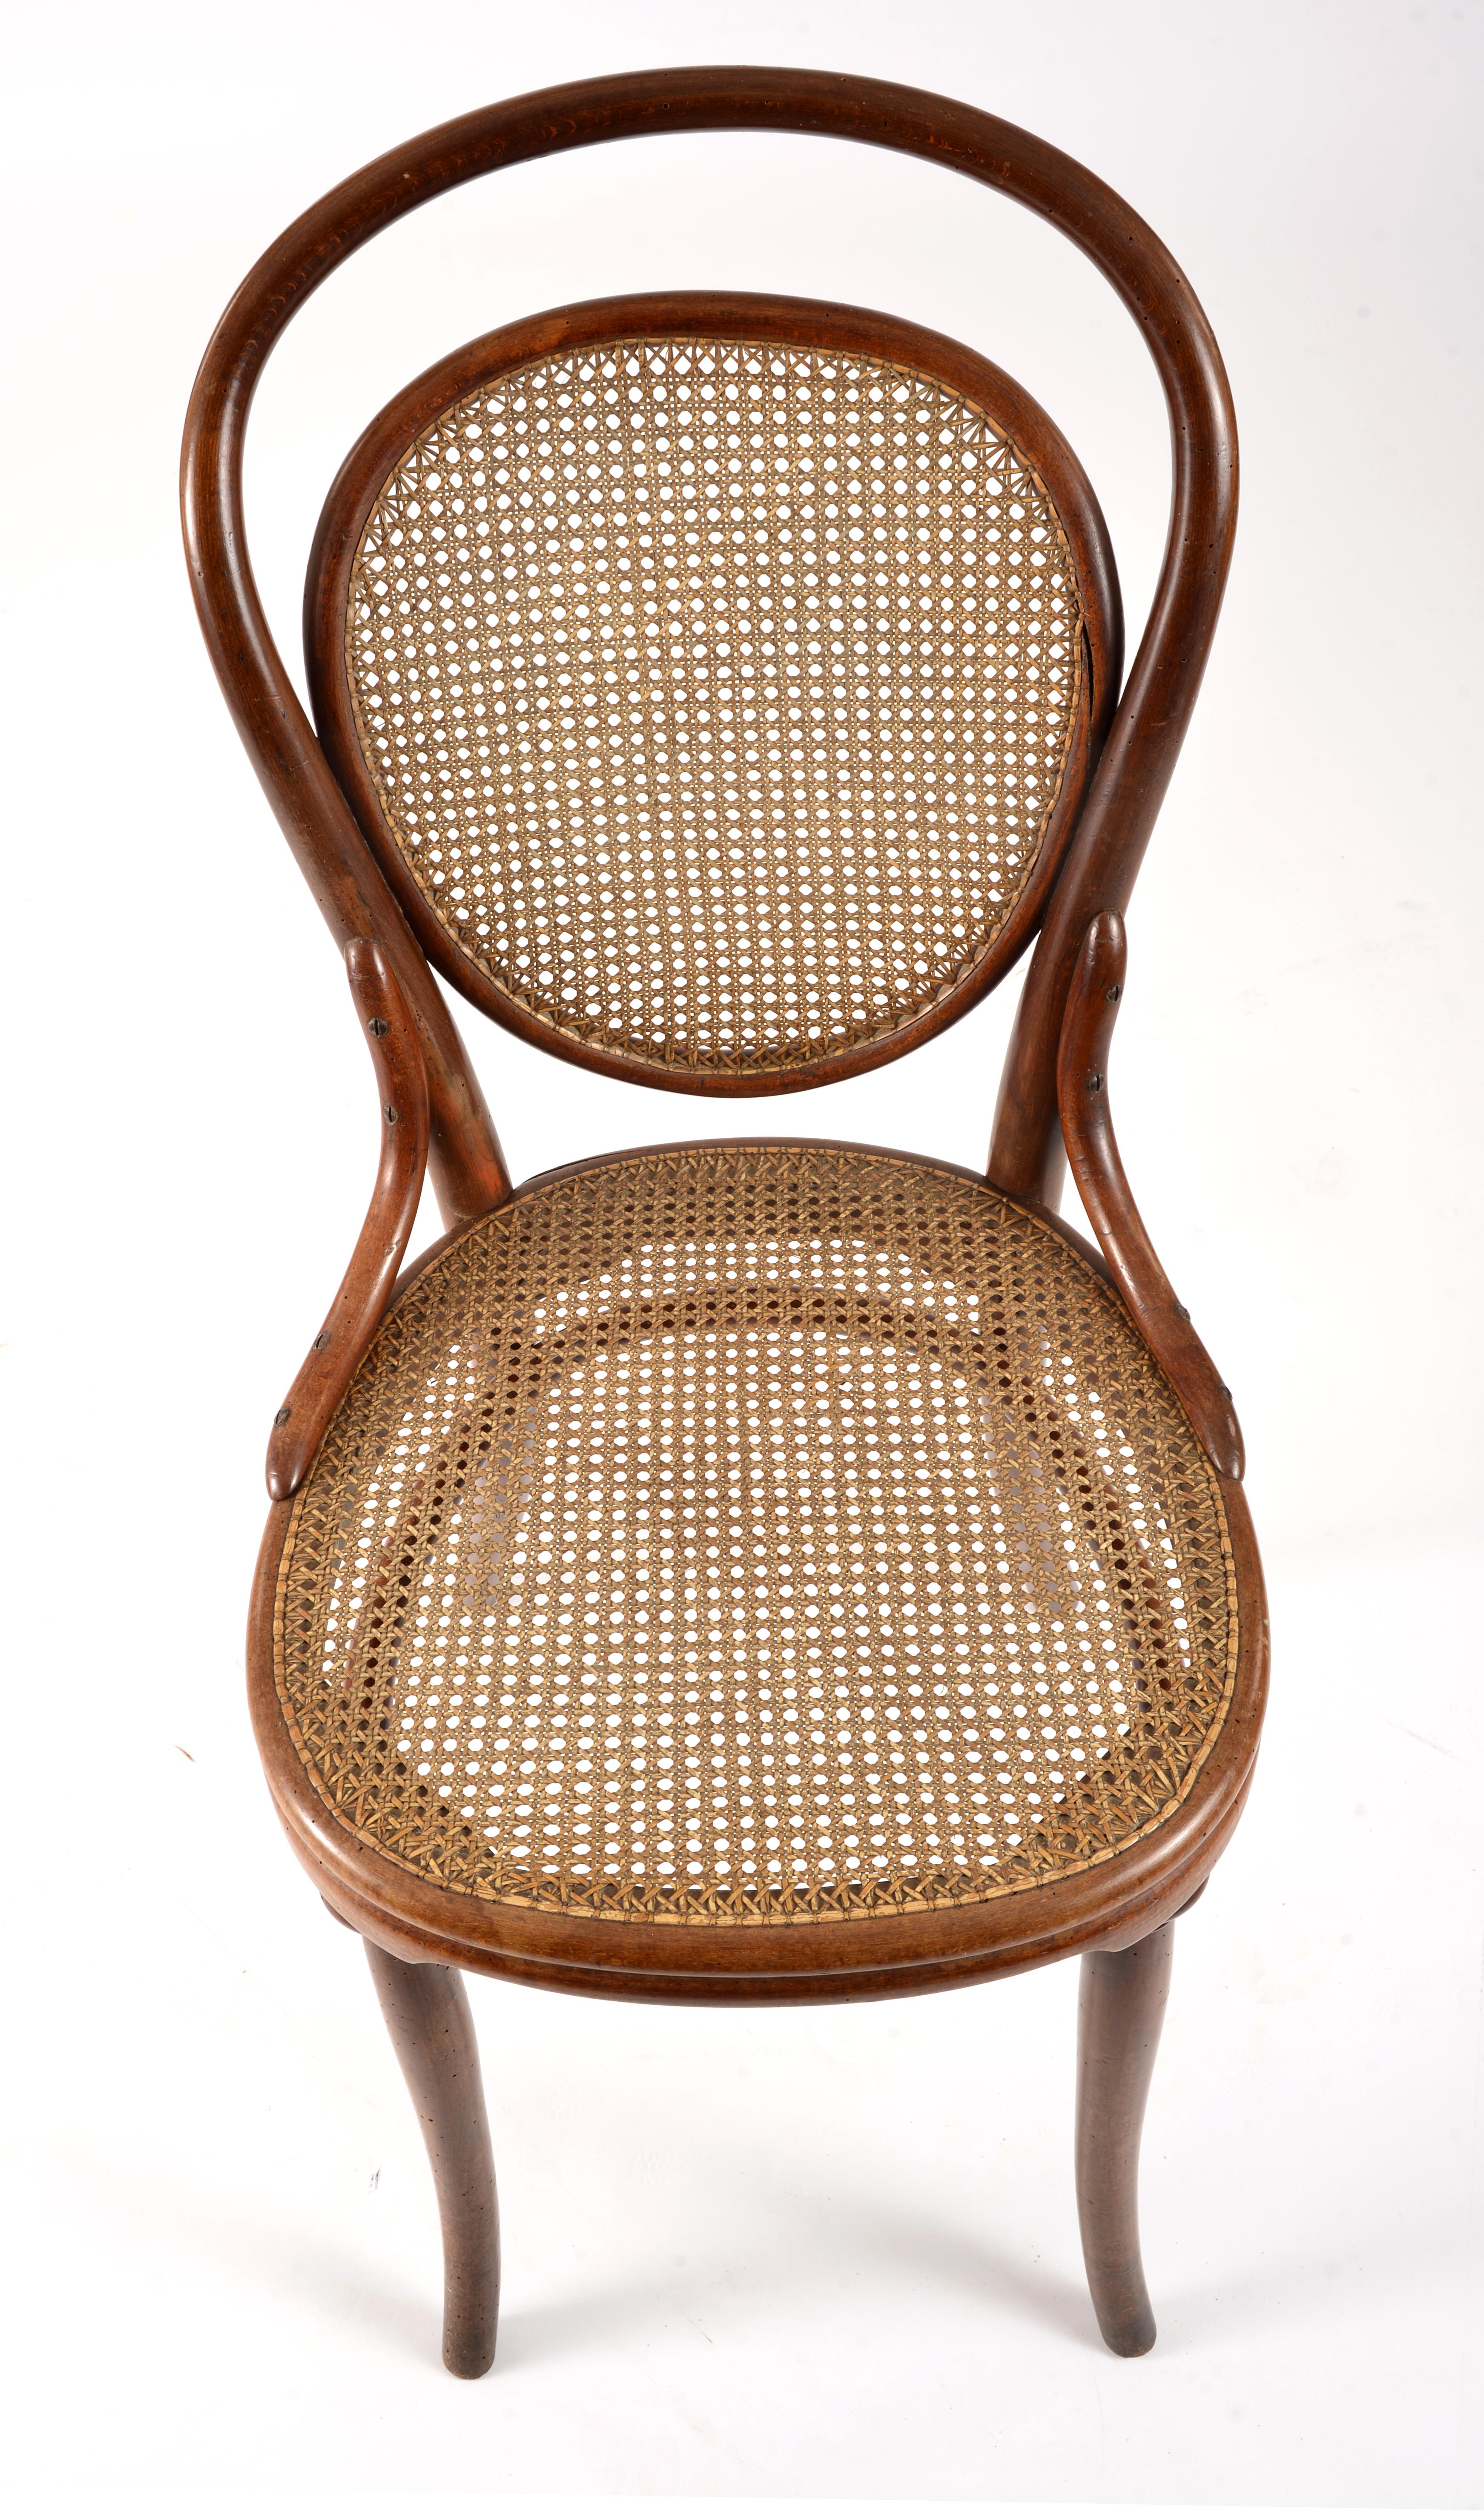 4 bentwood chairs, number 7, published by Thonet at the end of the 19th century. 6